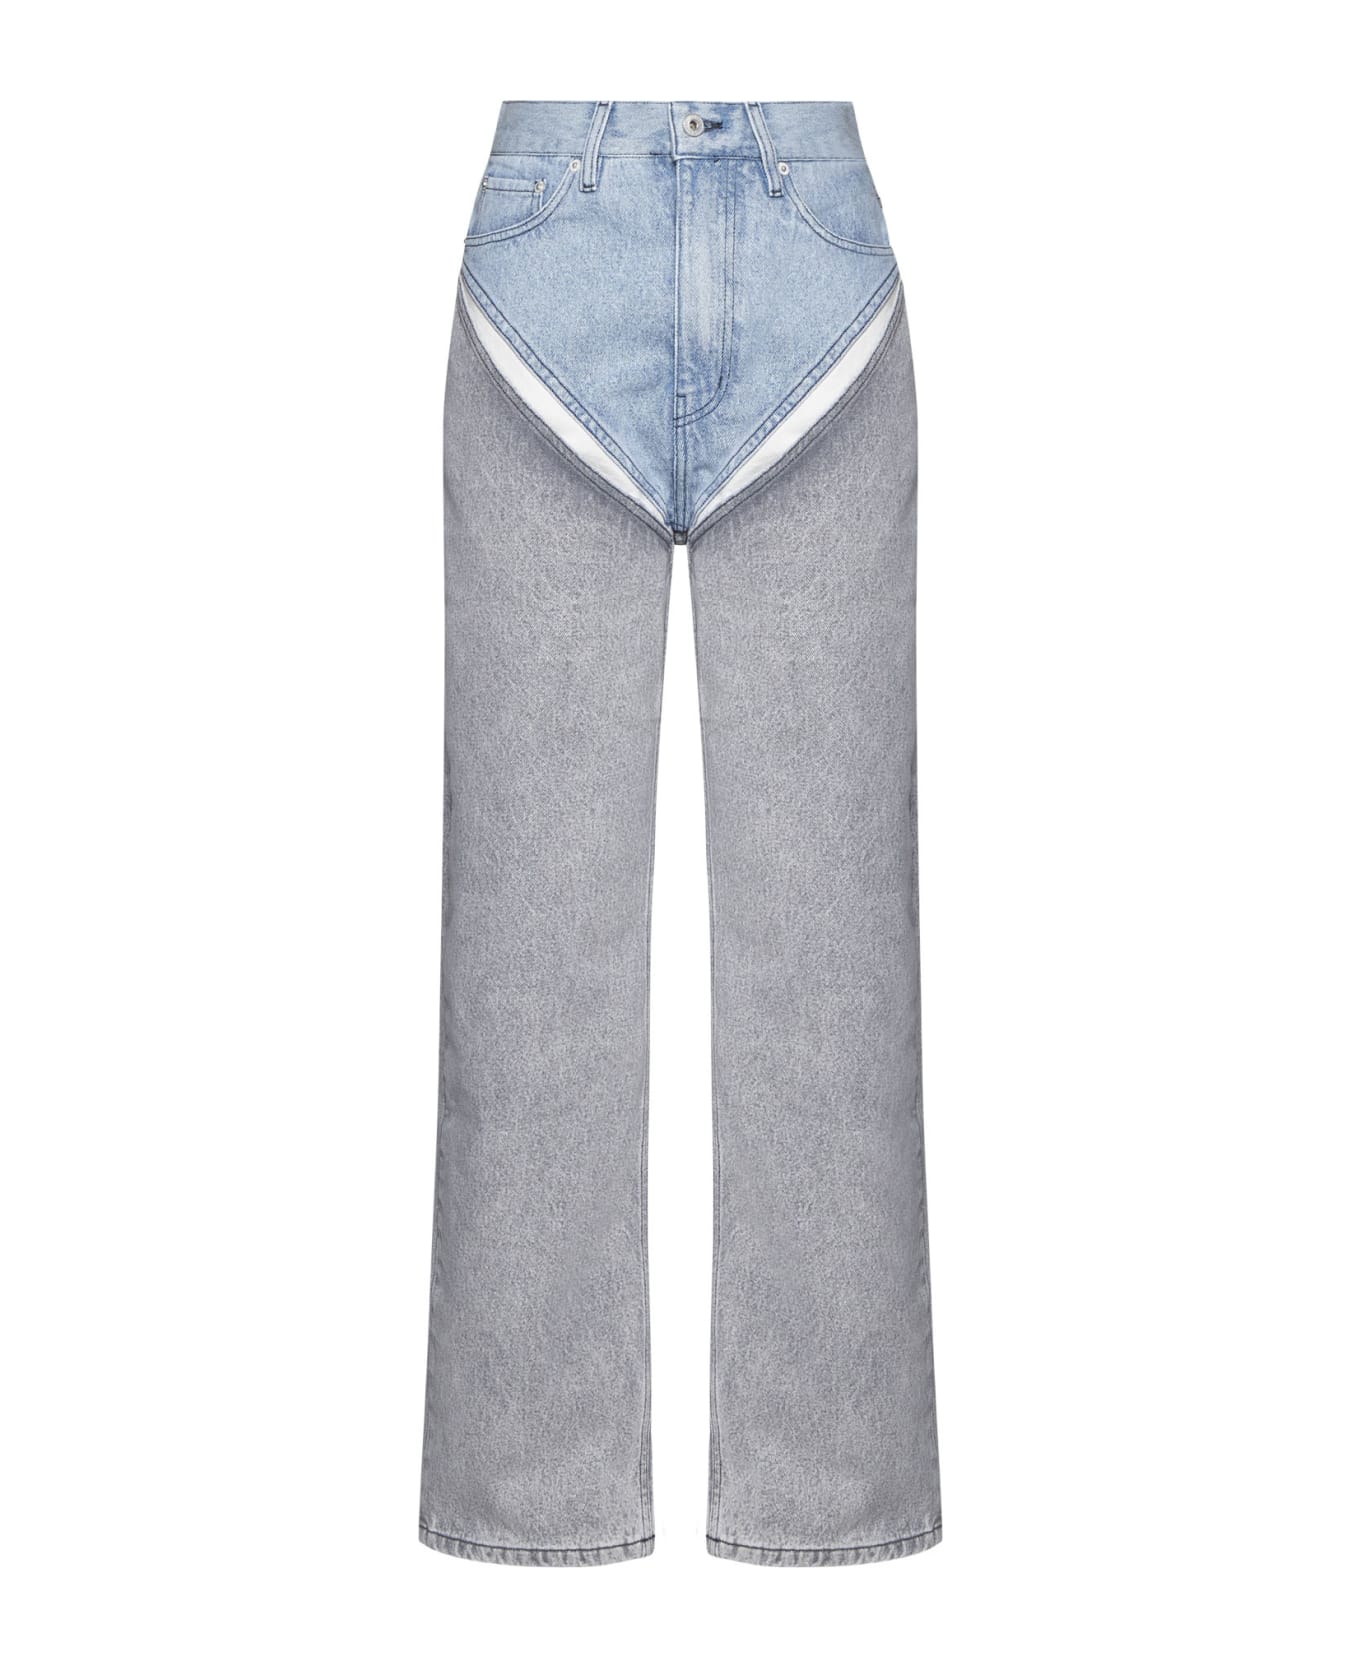 Y/Project Jeans - Ice blue/grey